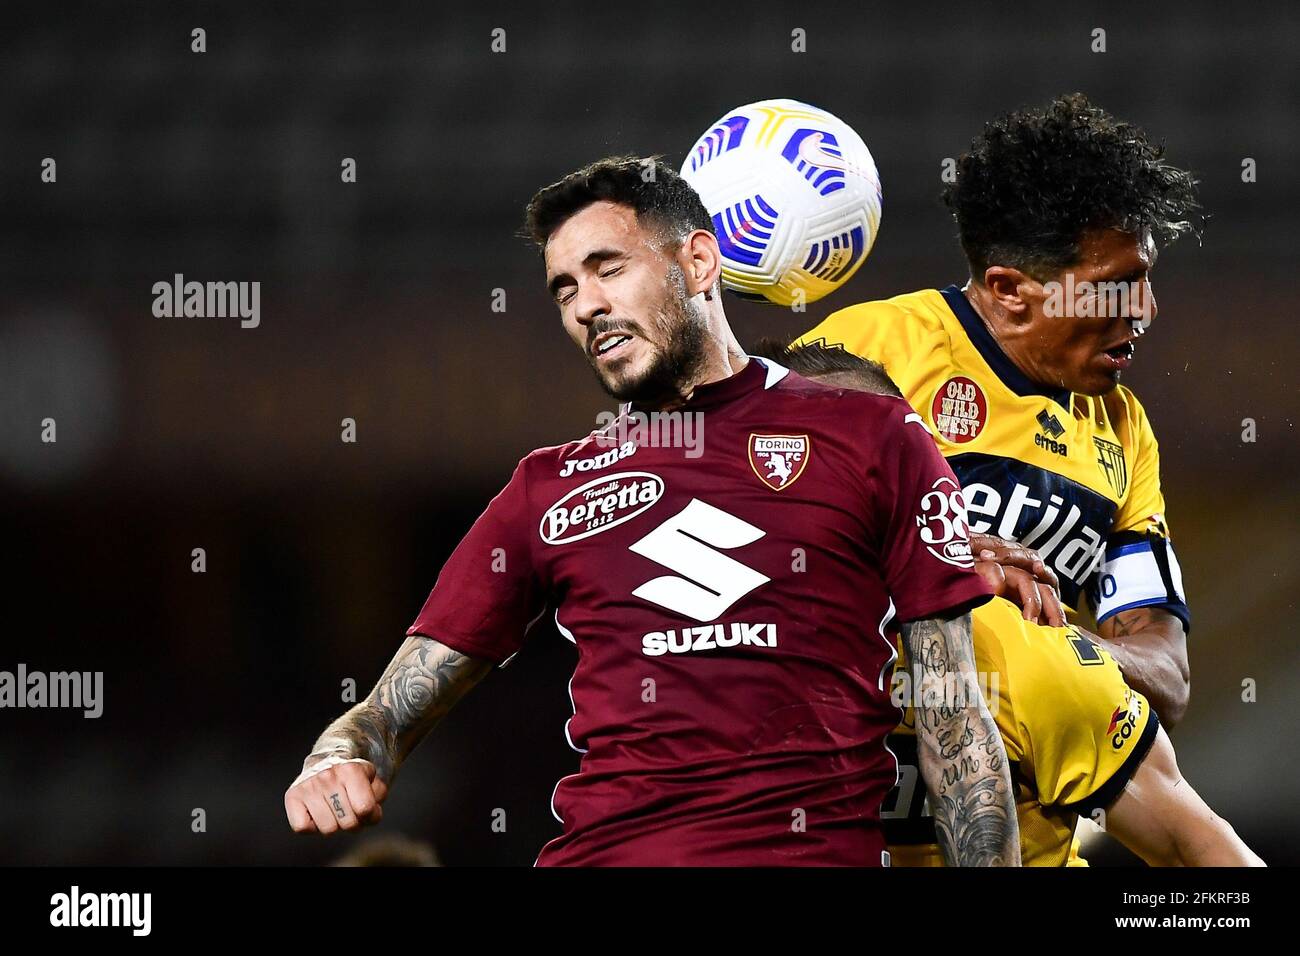 Turin, Italy. 03 May 2021. Antonio Sanabria (L) of Torino FC competes for a header with Bruno Alves of Parma Calcio during the Serie A football match between Torino FC and Parma Calcio. Credit: Nicolò Campo/Alamy Live News Stock Photo